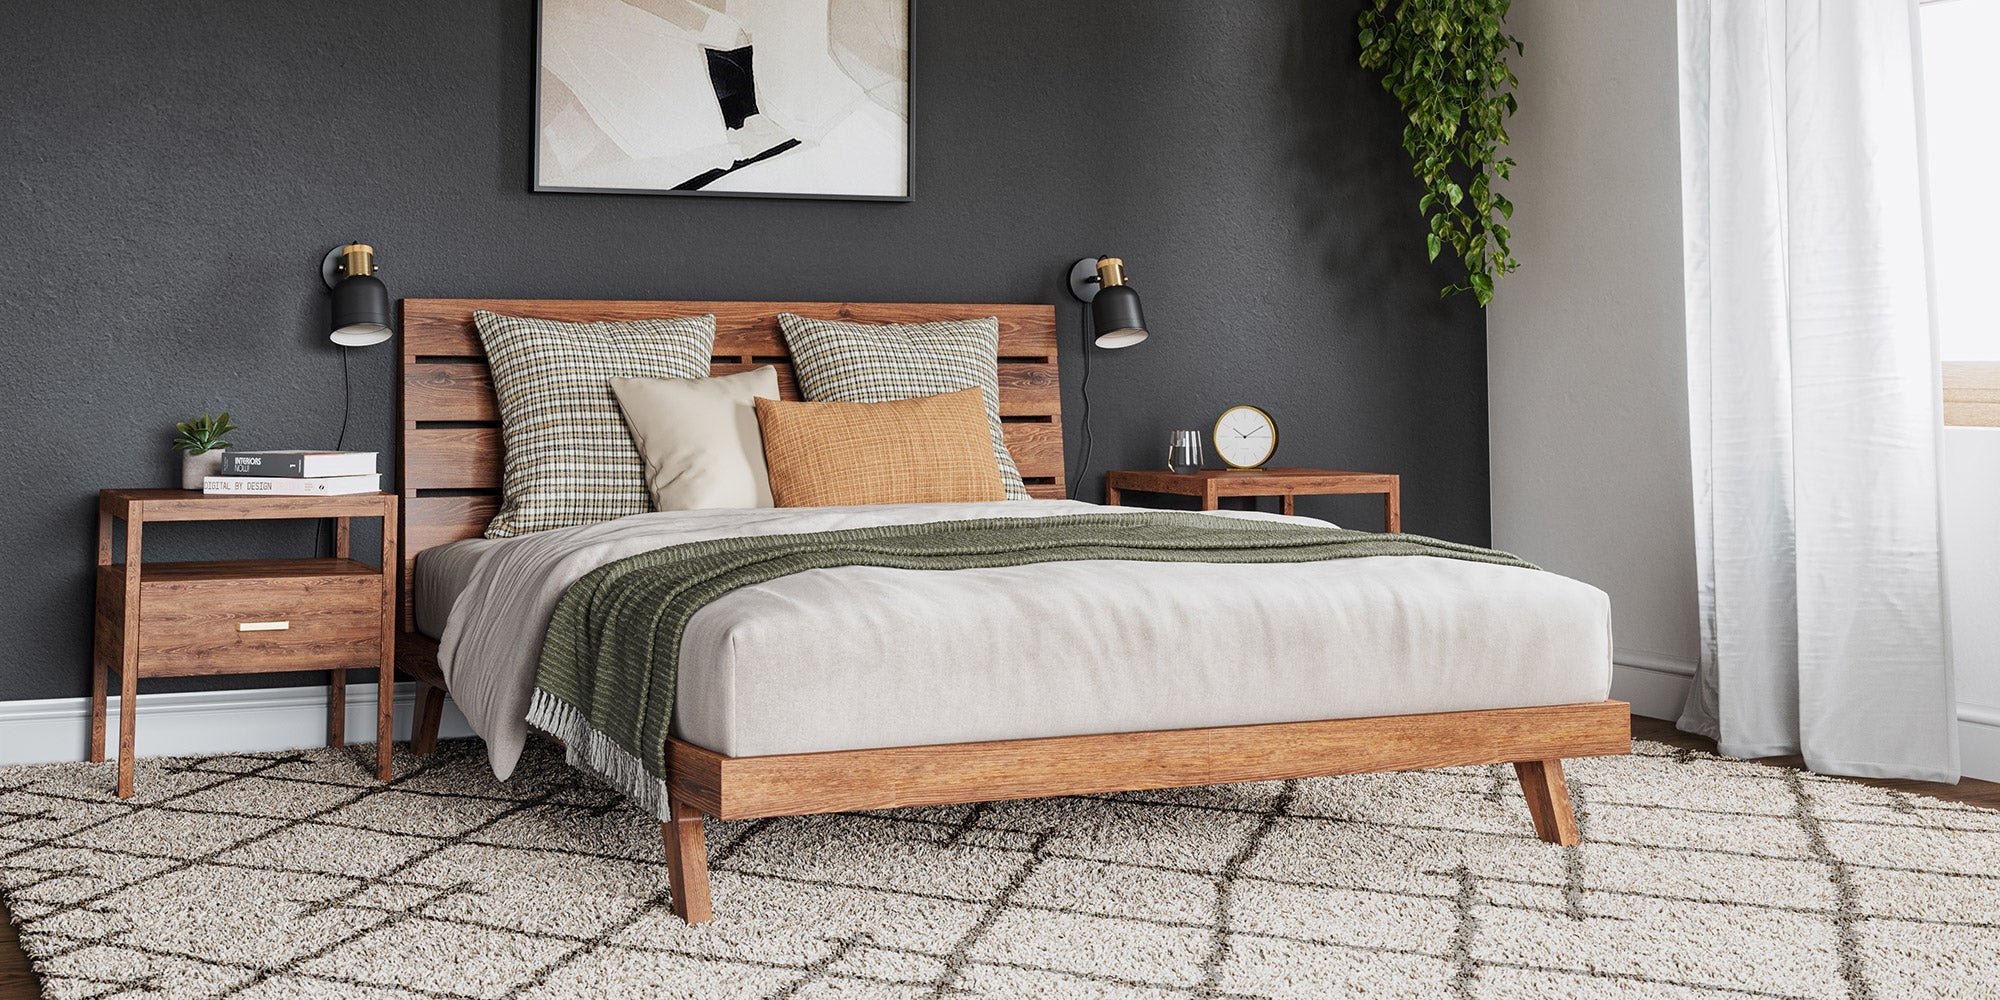 Looking for Wooden Bed? Then Look no Further than Pepperfry